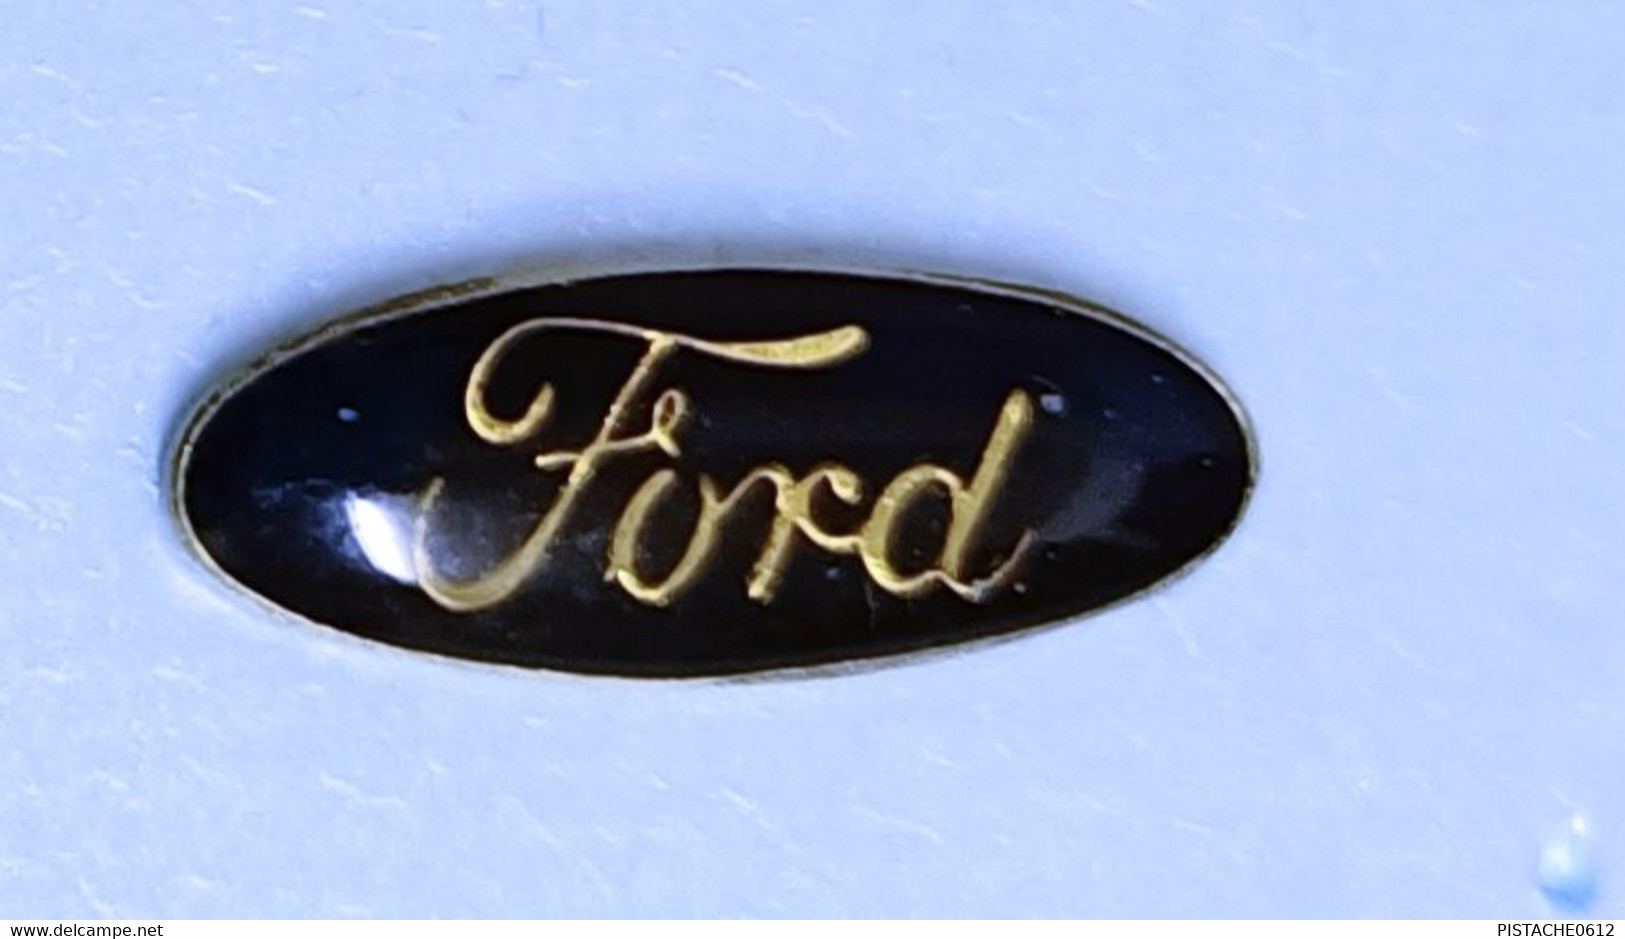 Pin's Ford  Logo - Ford